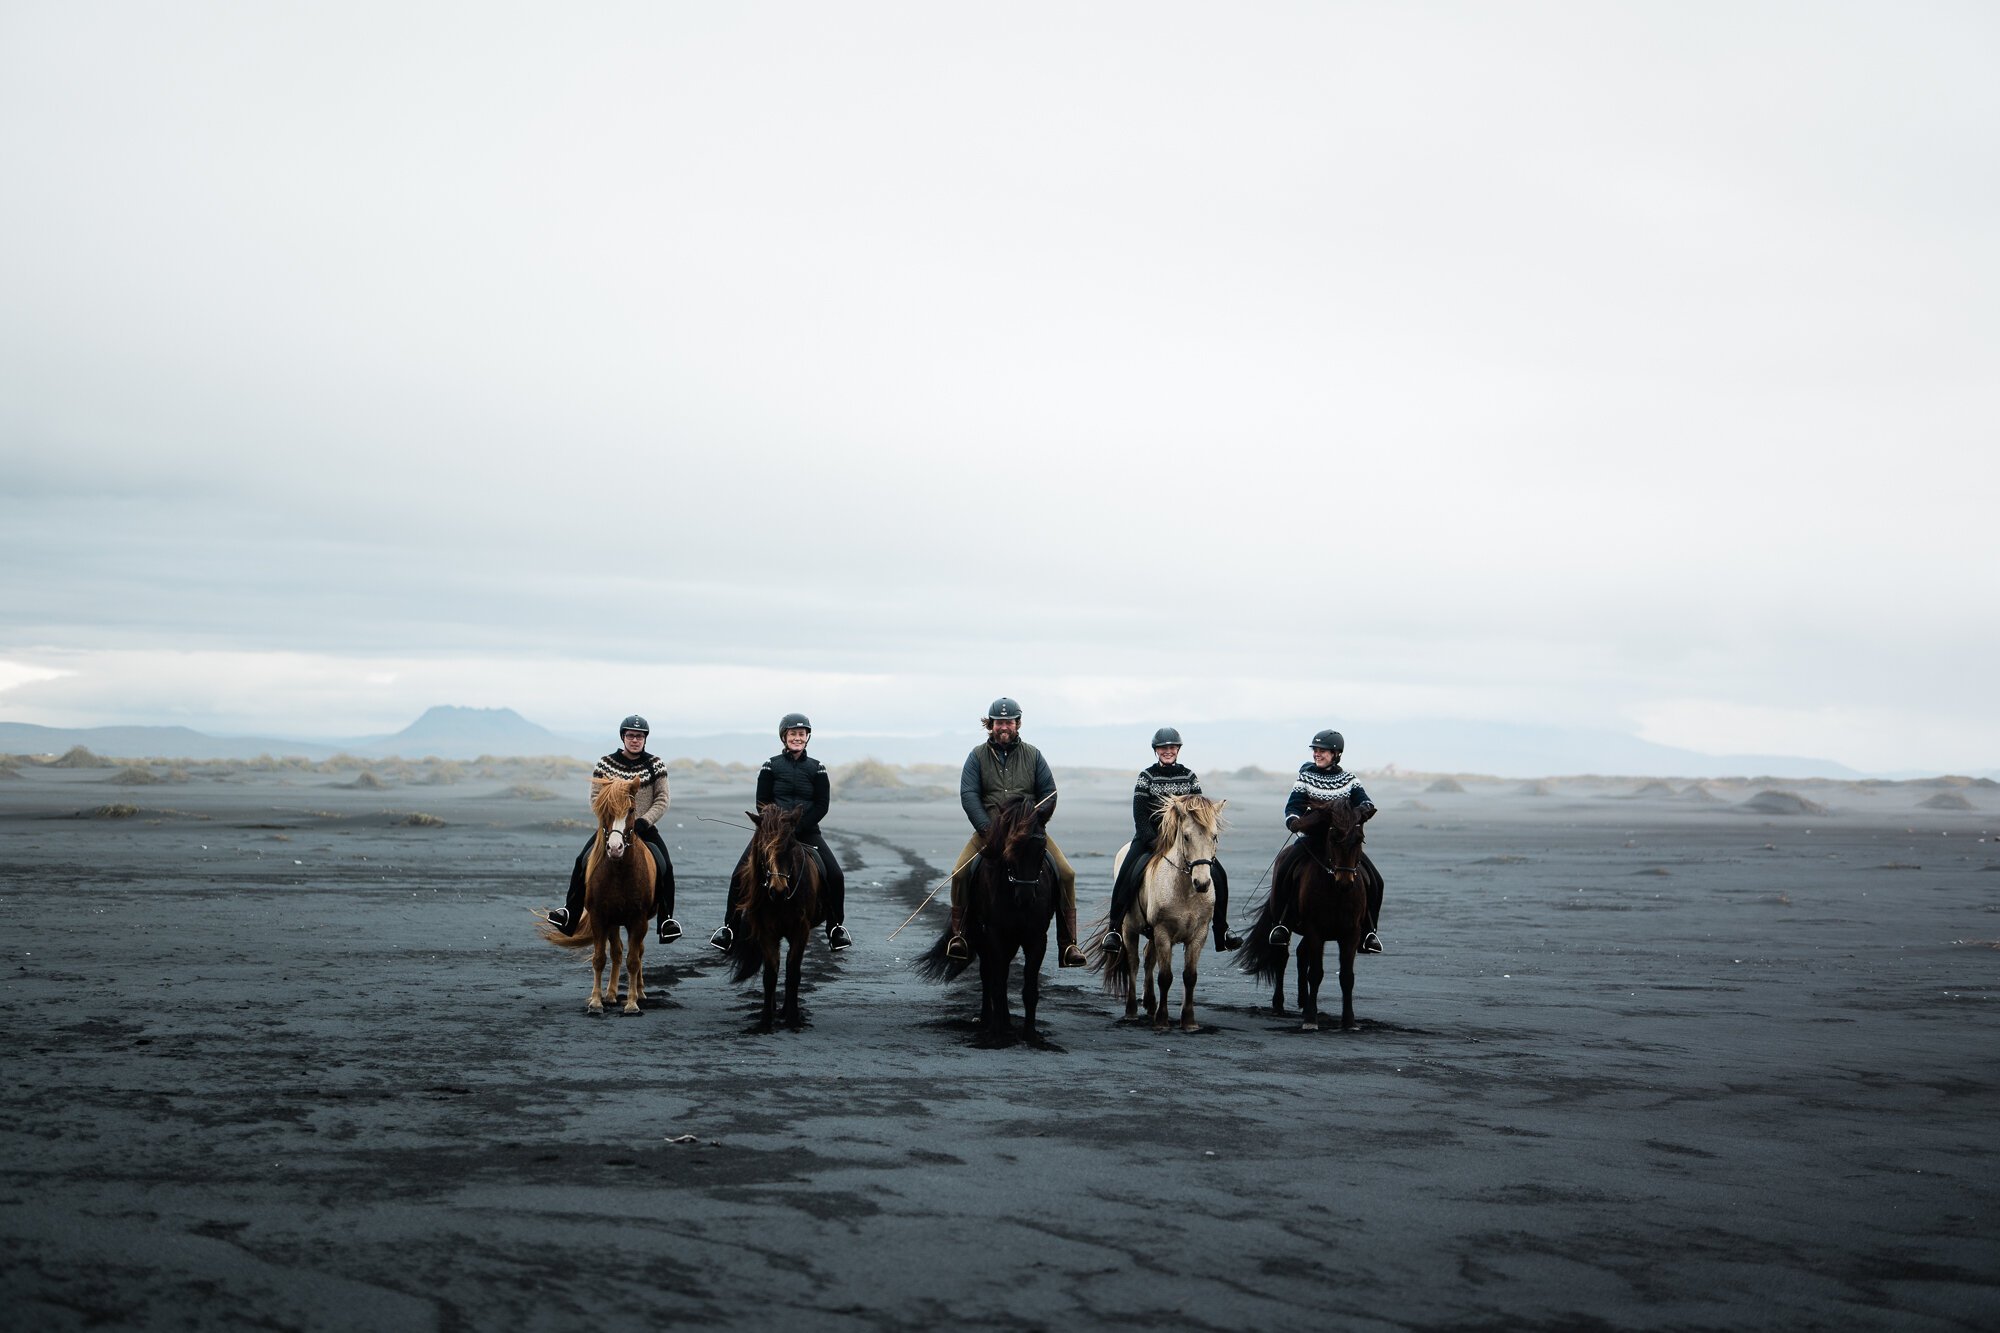 Abigail Bobo's image for Airbnb shows five people on horses in an open area